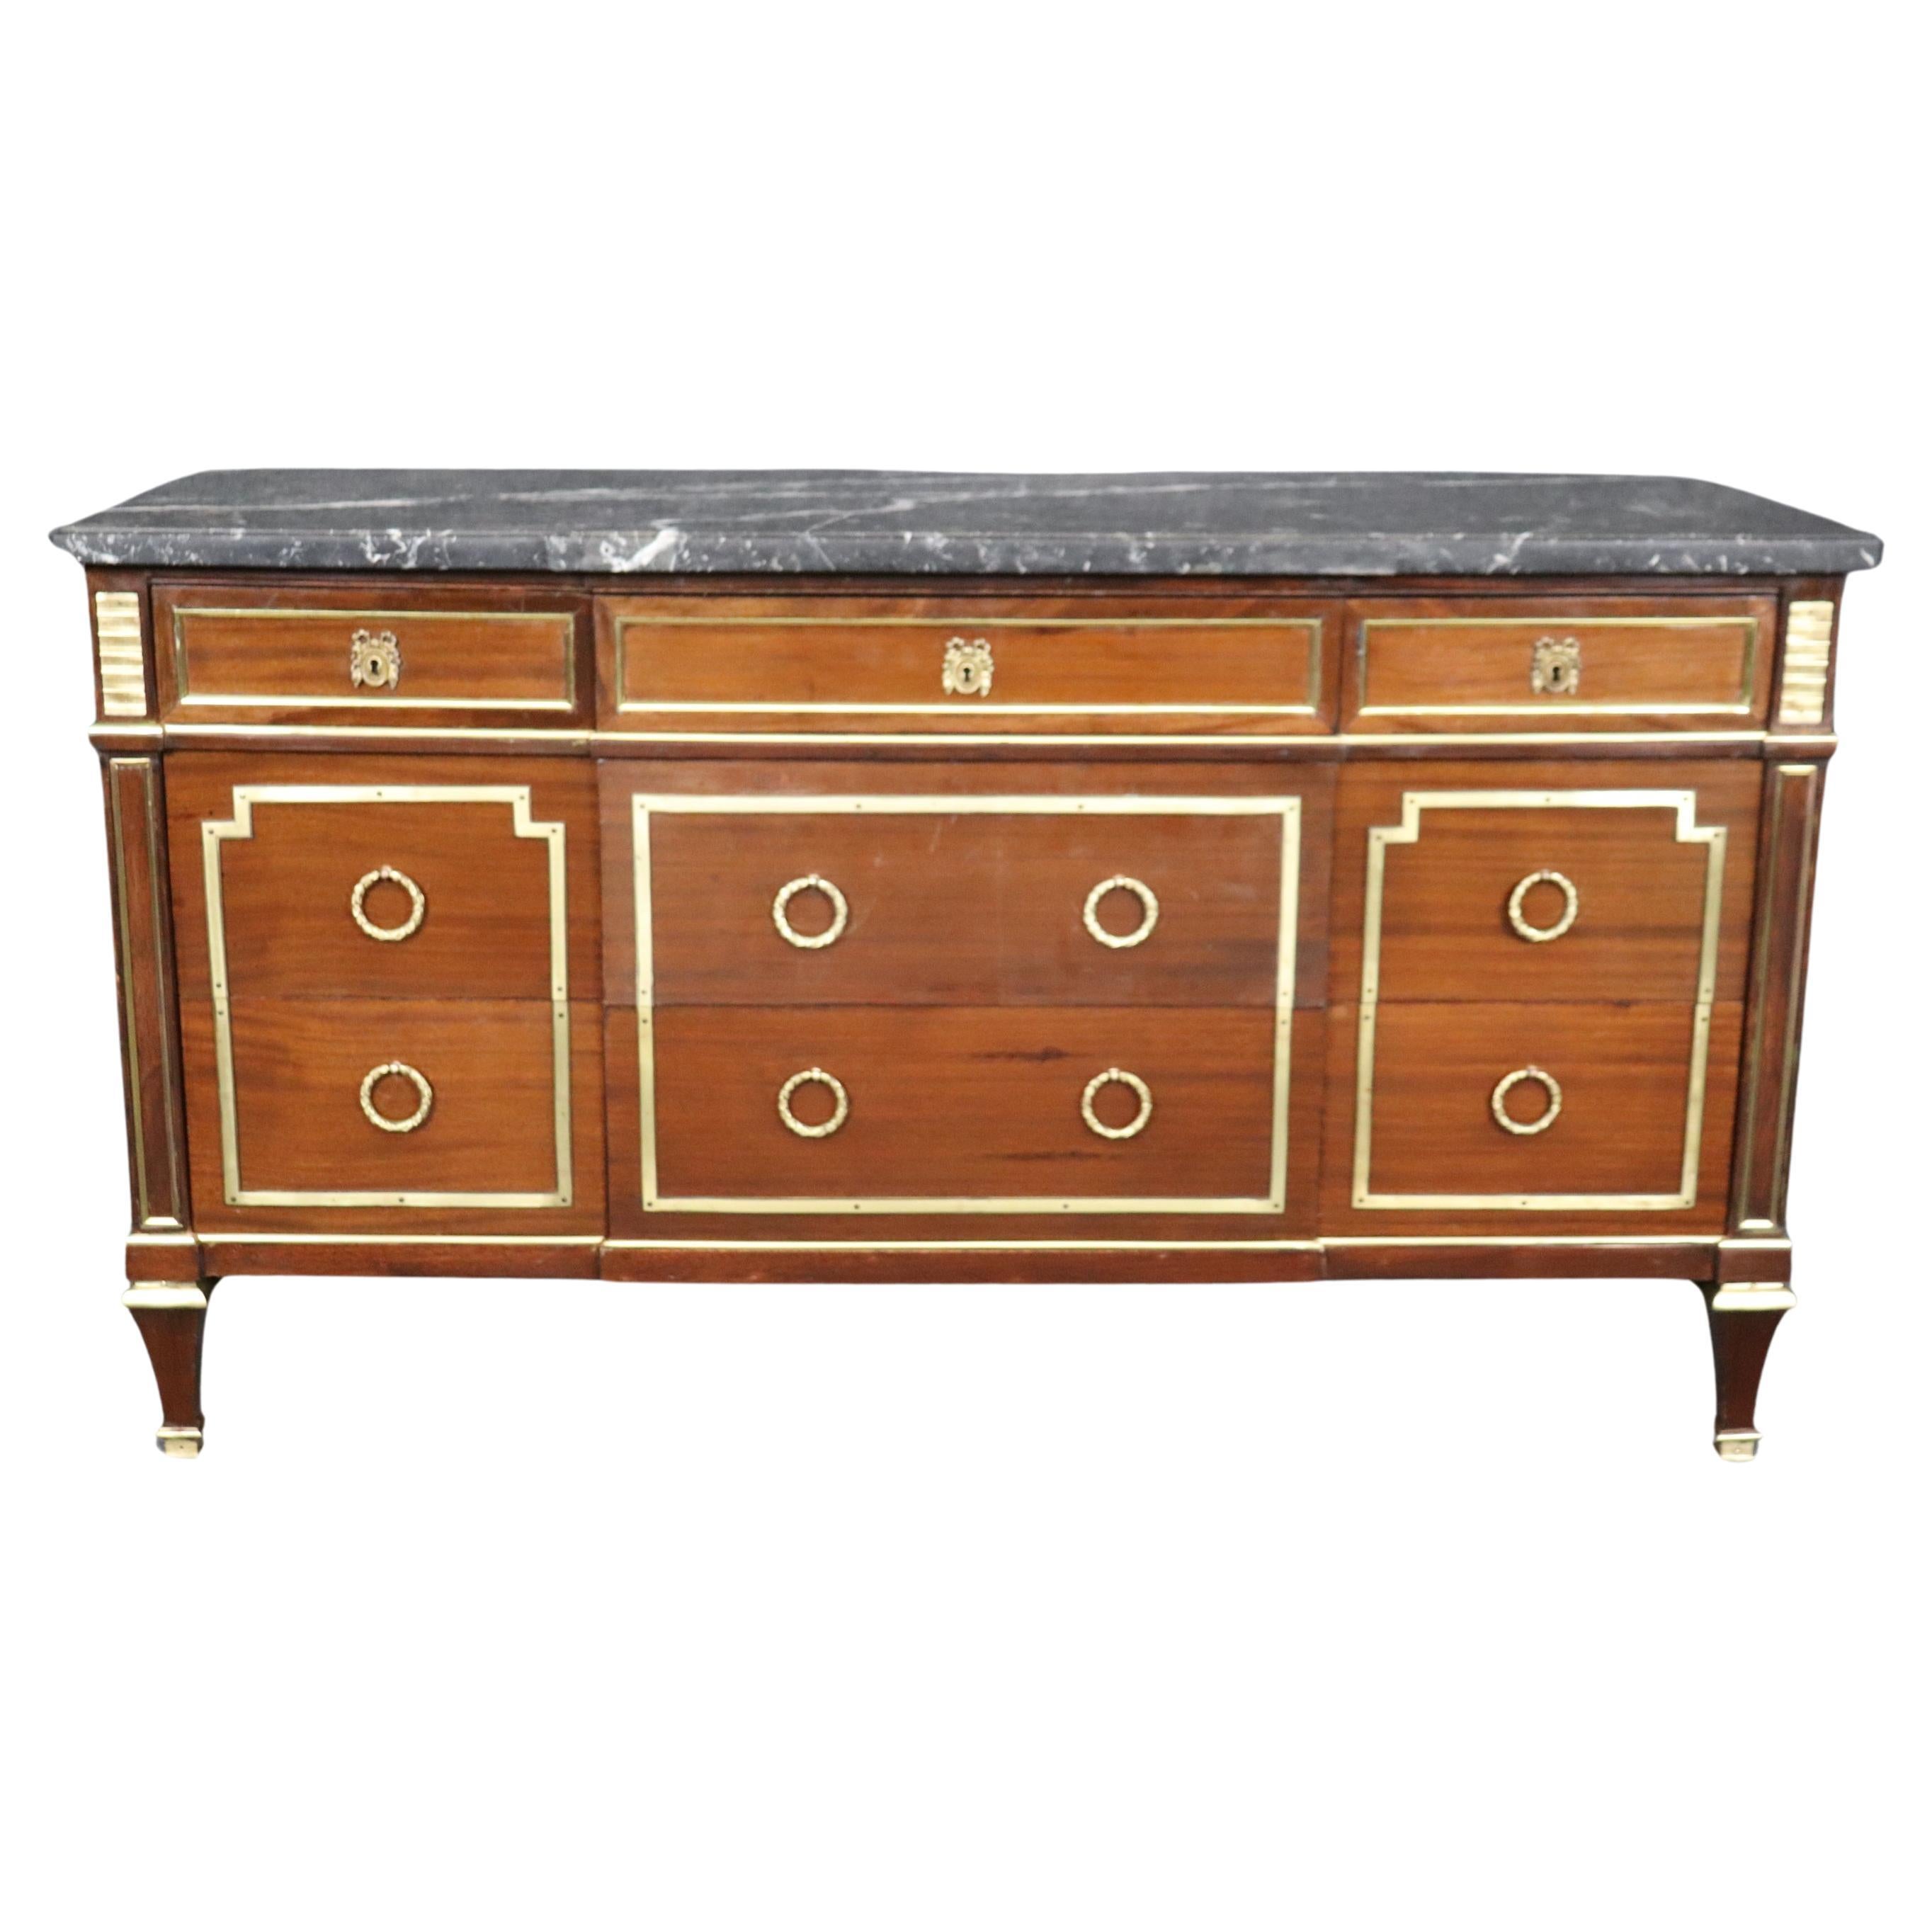 Quintessential Signed Maison Jansen Bronze Mounted Marble Top Commode Dresser  For Sale